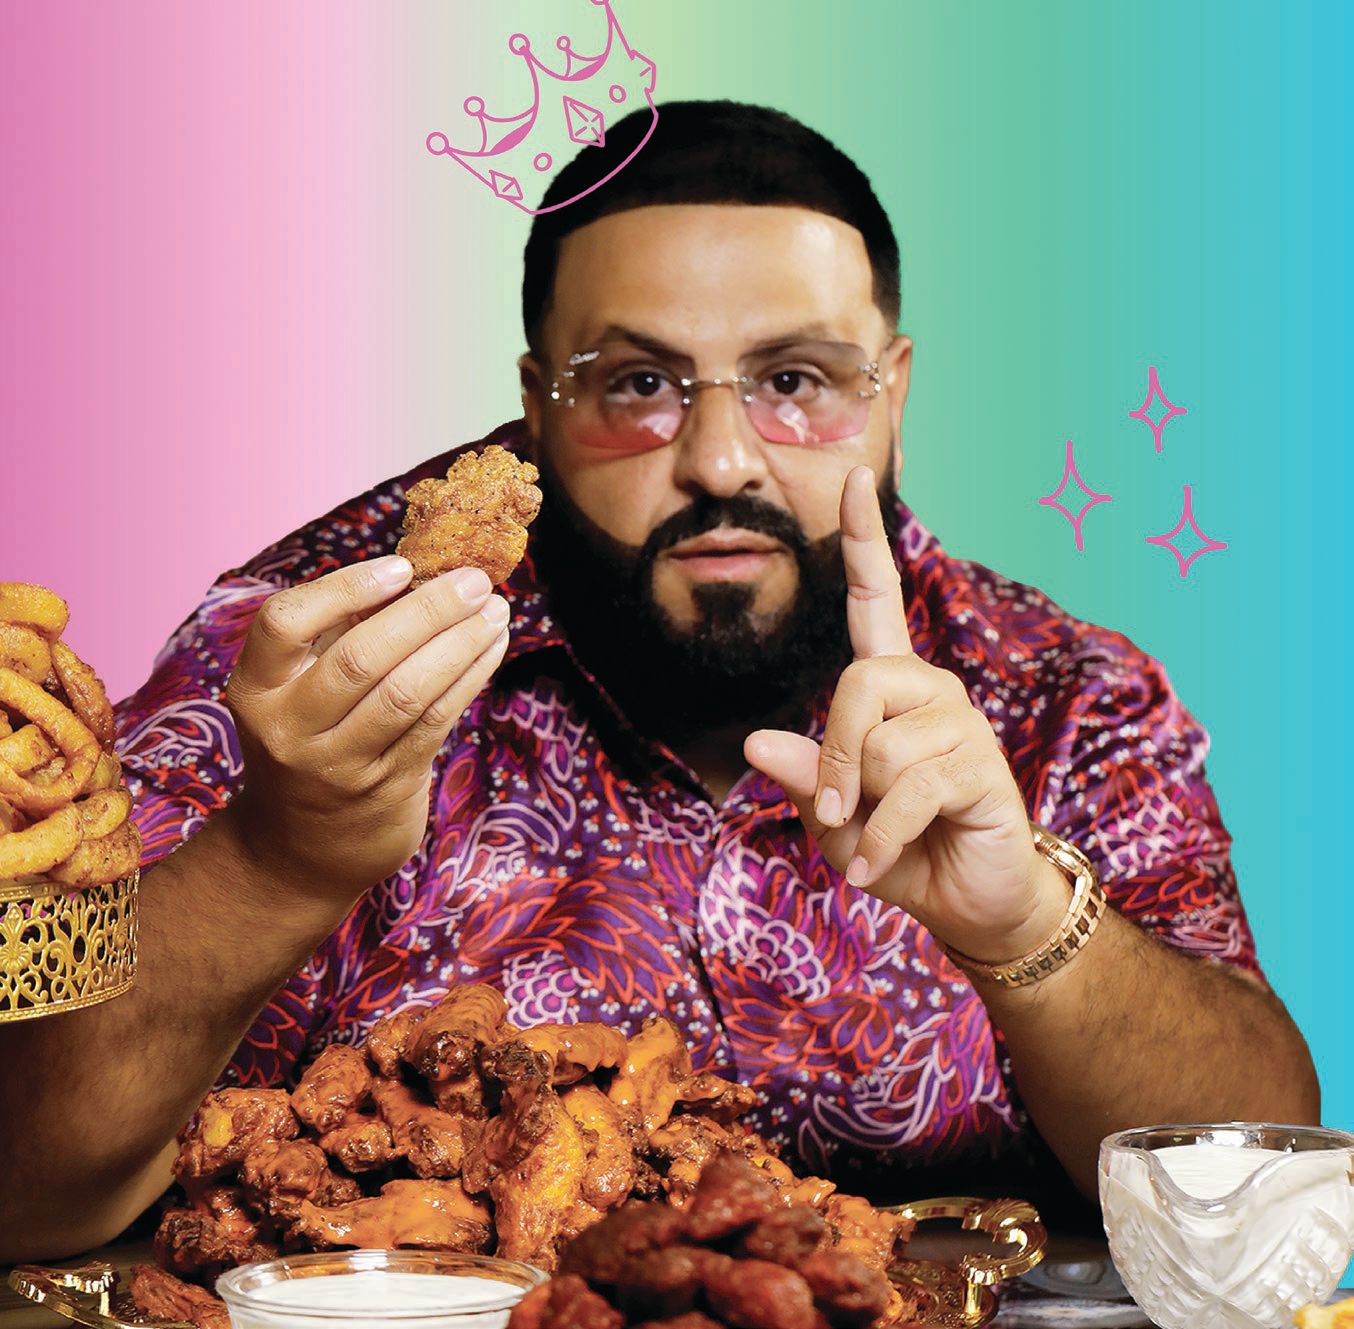 DJ Khaled continues on his mogul status trajectory as he enters the food industry with Another Wing. PHOTO BY IVAN BERRIOS/COURTESY OF REEF